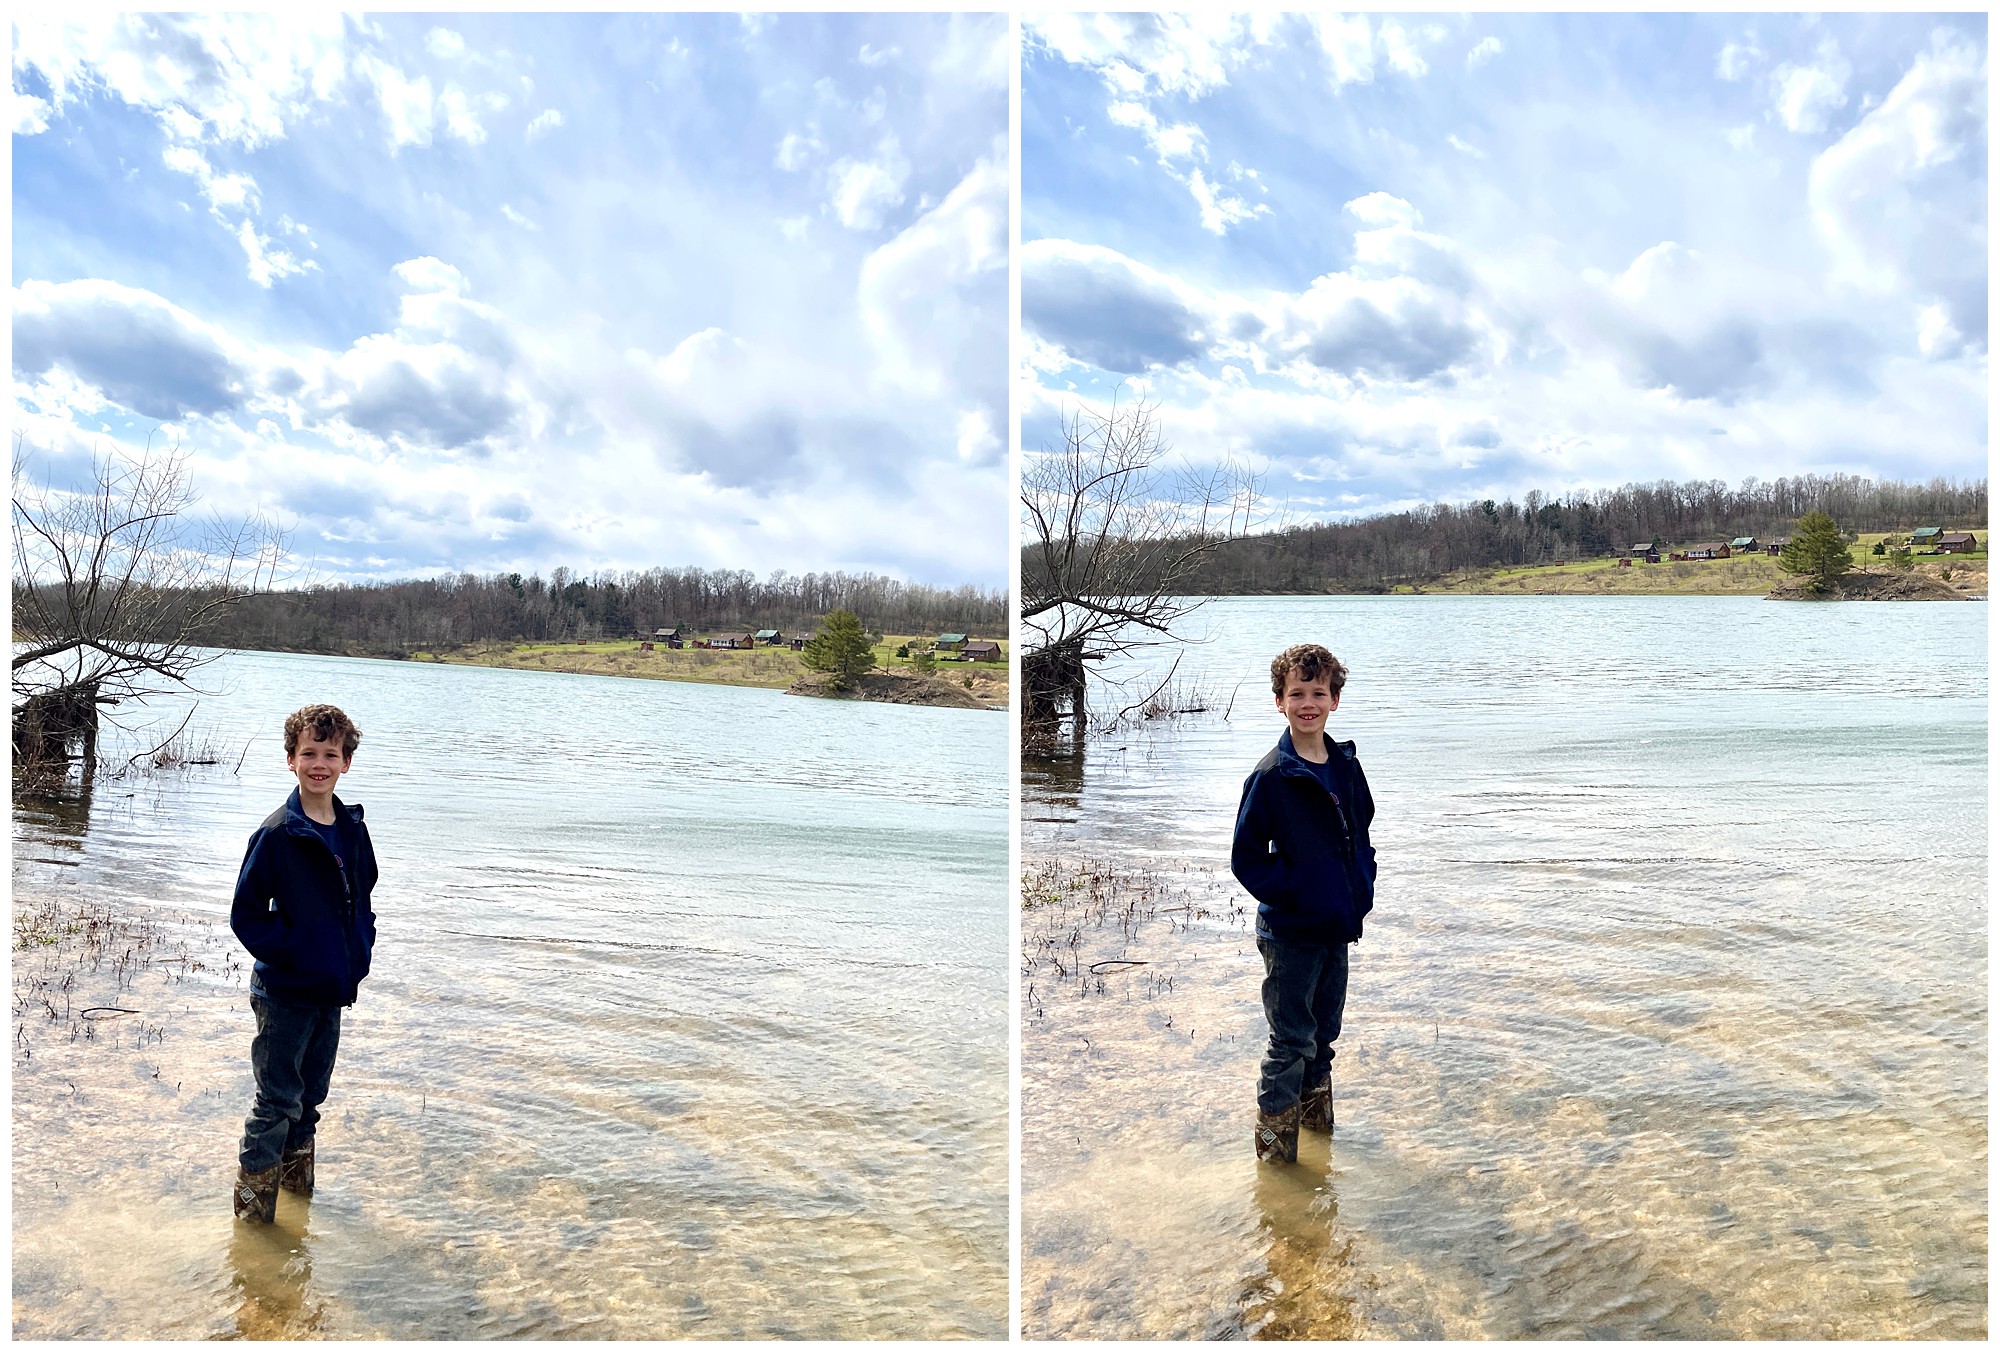 Young boy standing in a lake with water up to his shins.